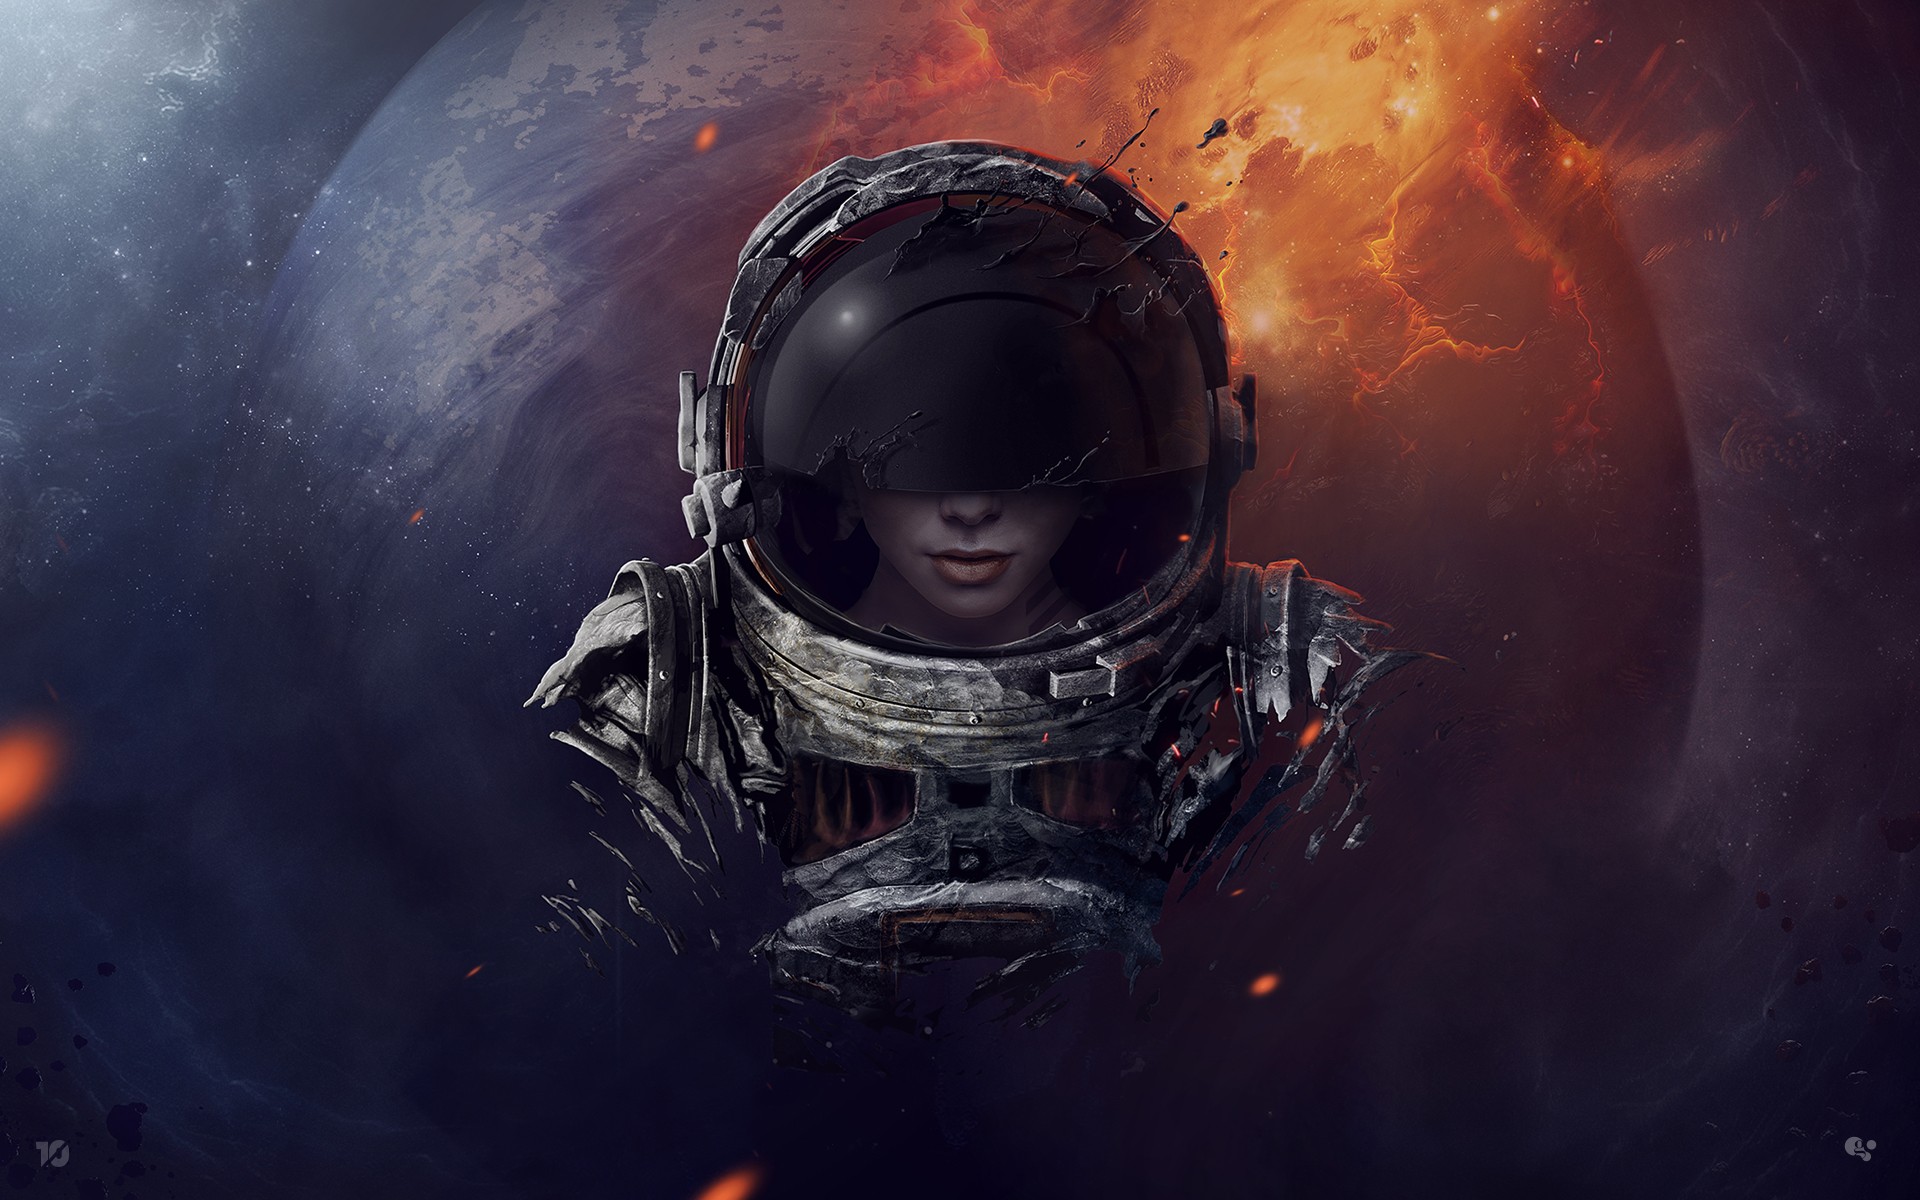 General 1920x1200 astronaut space fantasy art planet spacesuit abstract surreal digital art drawing helmet space art futuristic science fiction women science fiction artwork fictional character women frontal view visors